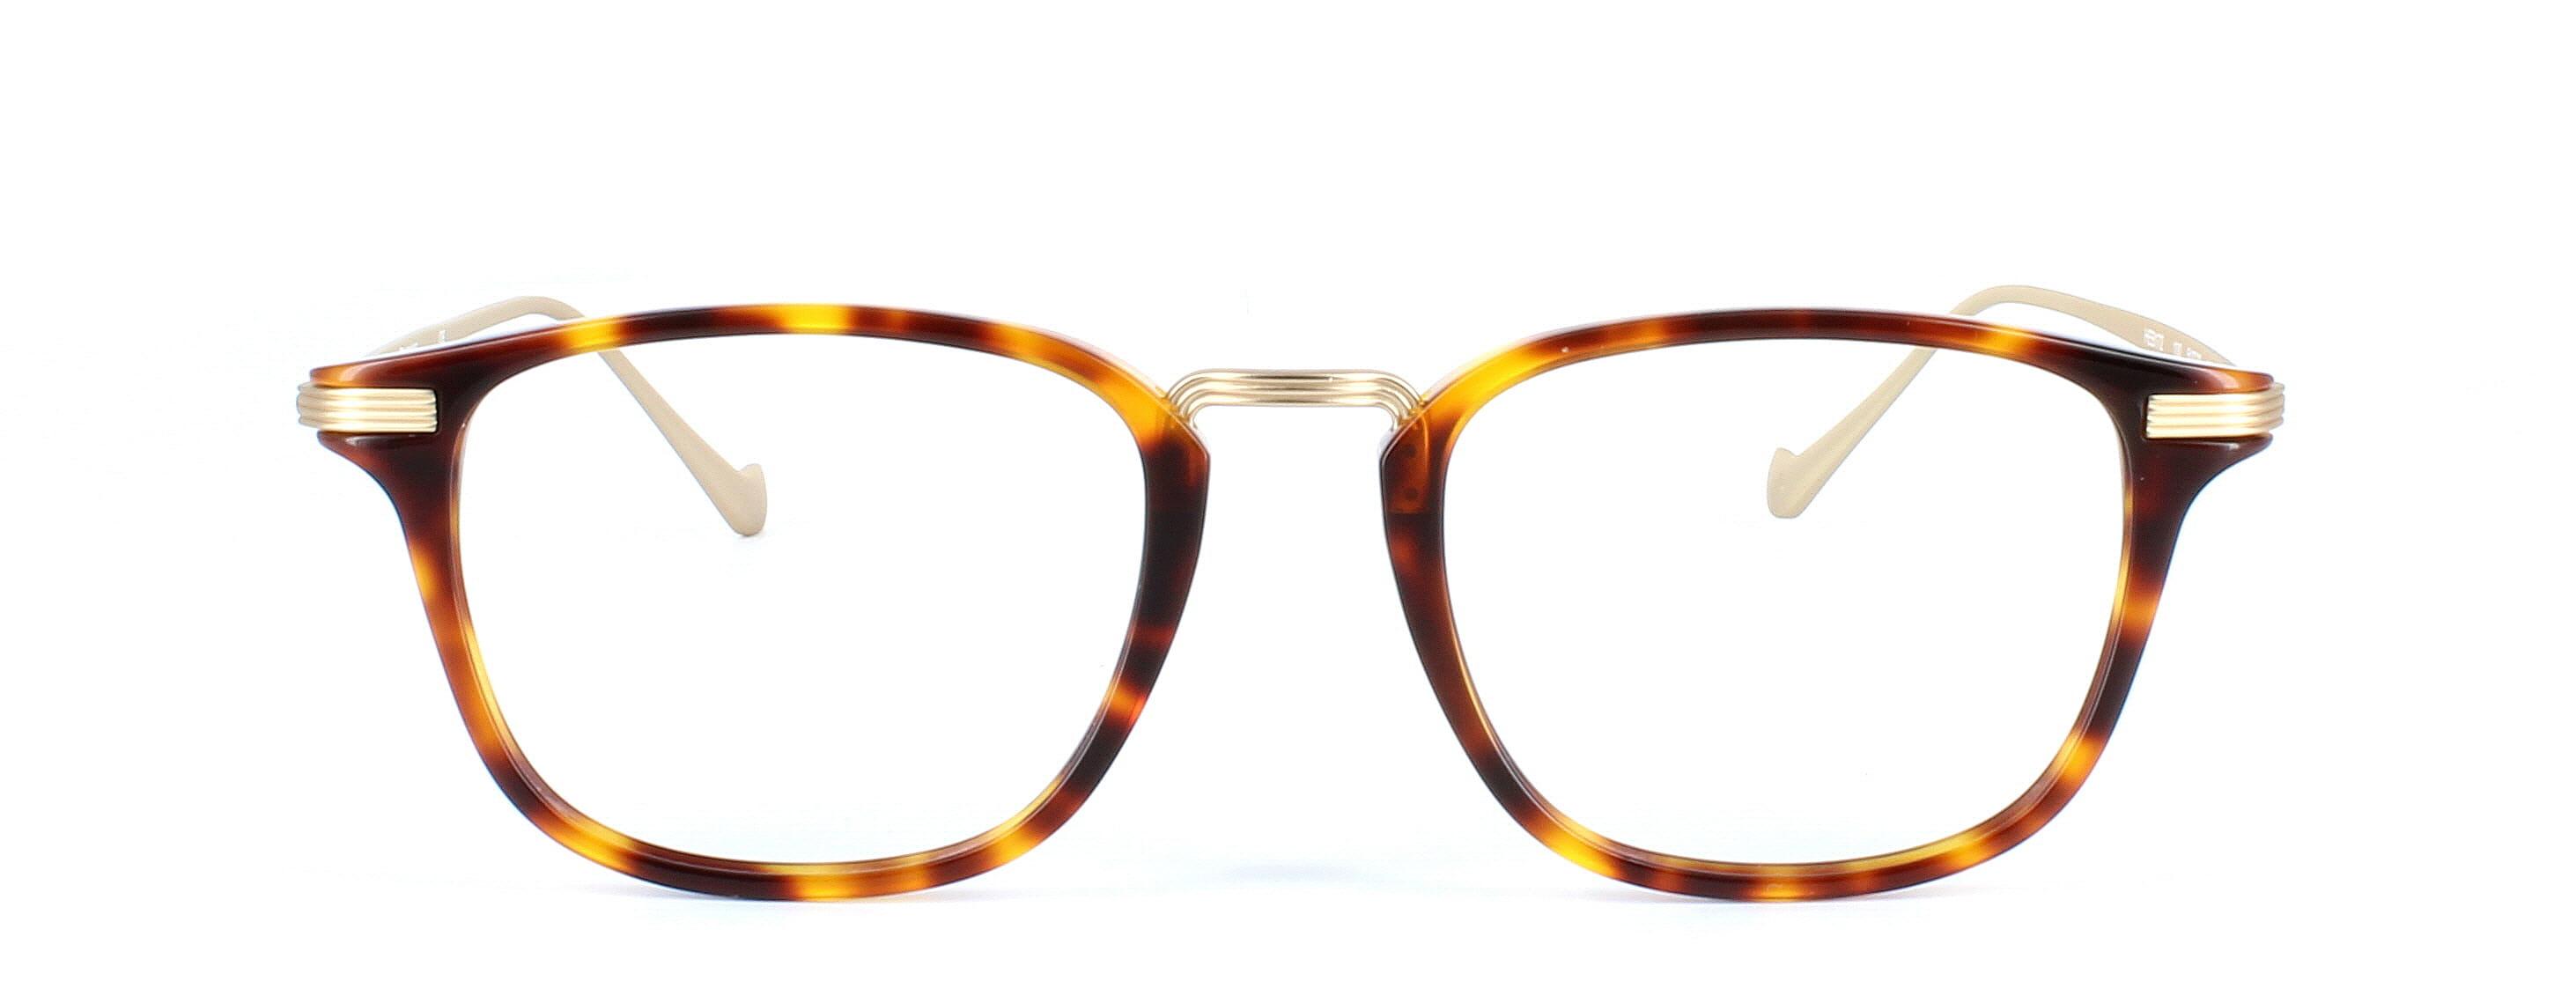 Hackett 172 - Unisex acetate and metal glasses frame in tortoise and gold - image 4